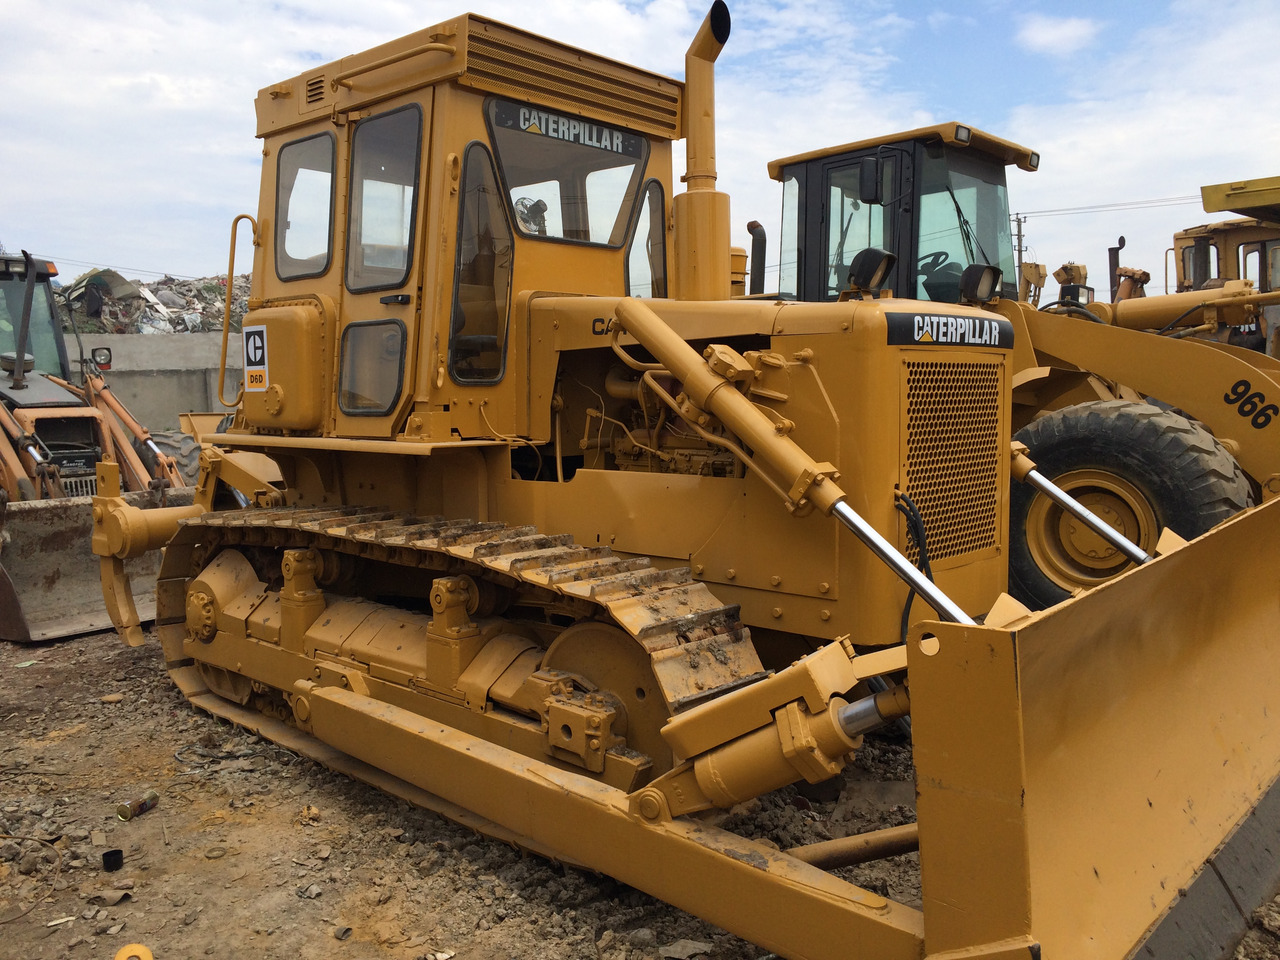 Yeni Buldozer Famous brand CATERPILLAR used D6D in  good condition for sale: fotoğraf 6